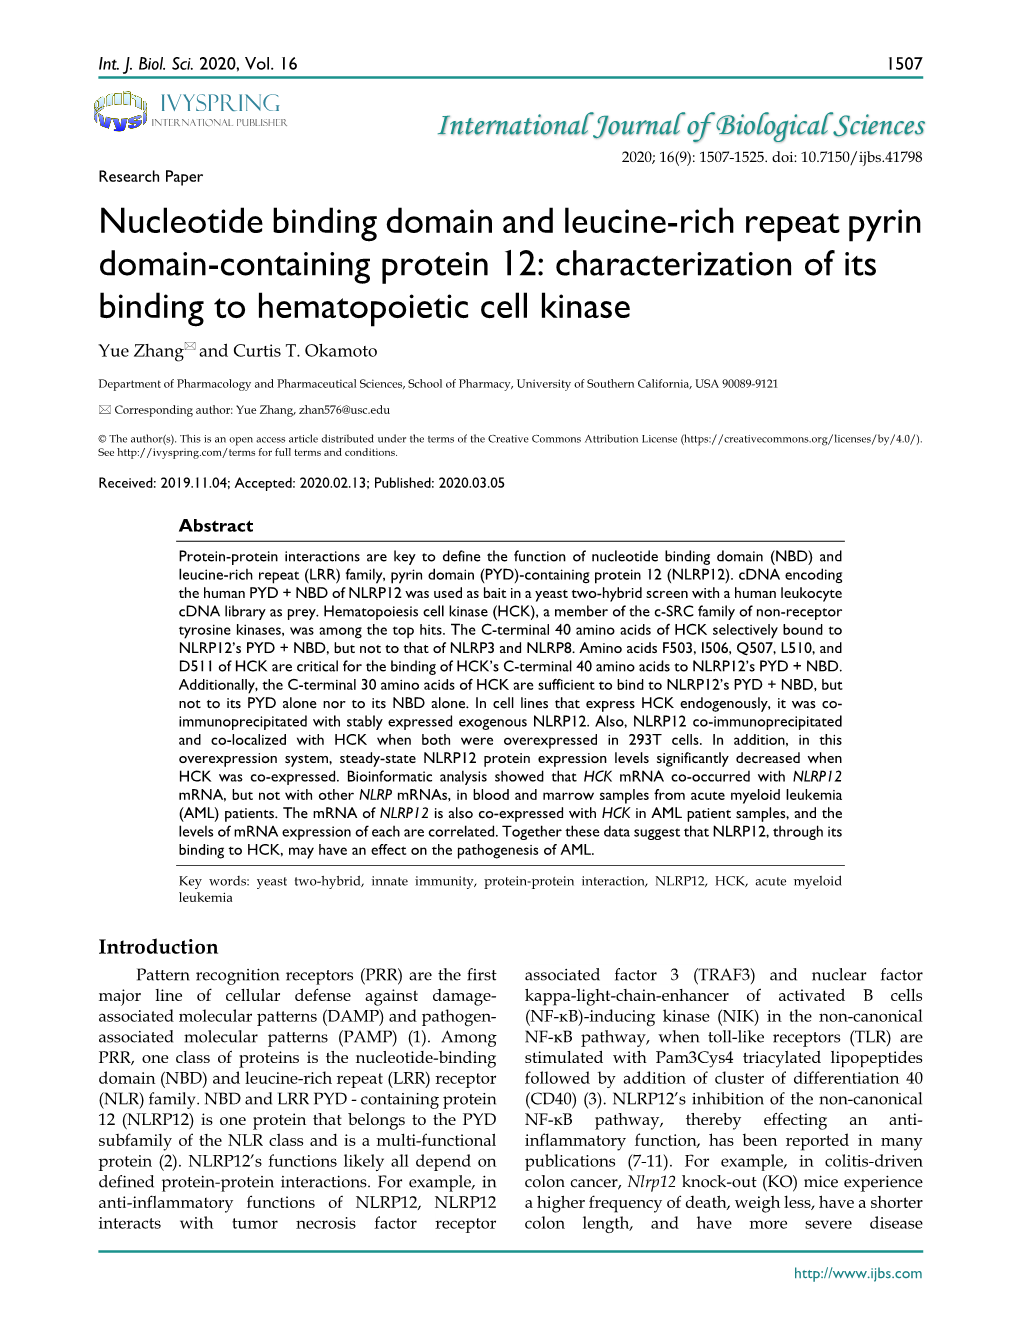 Characterization of Its Binding to Hematopoietic Cell Kinase Yue Zhang and Curtis T